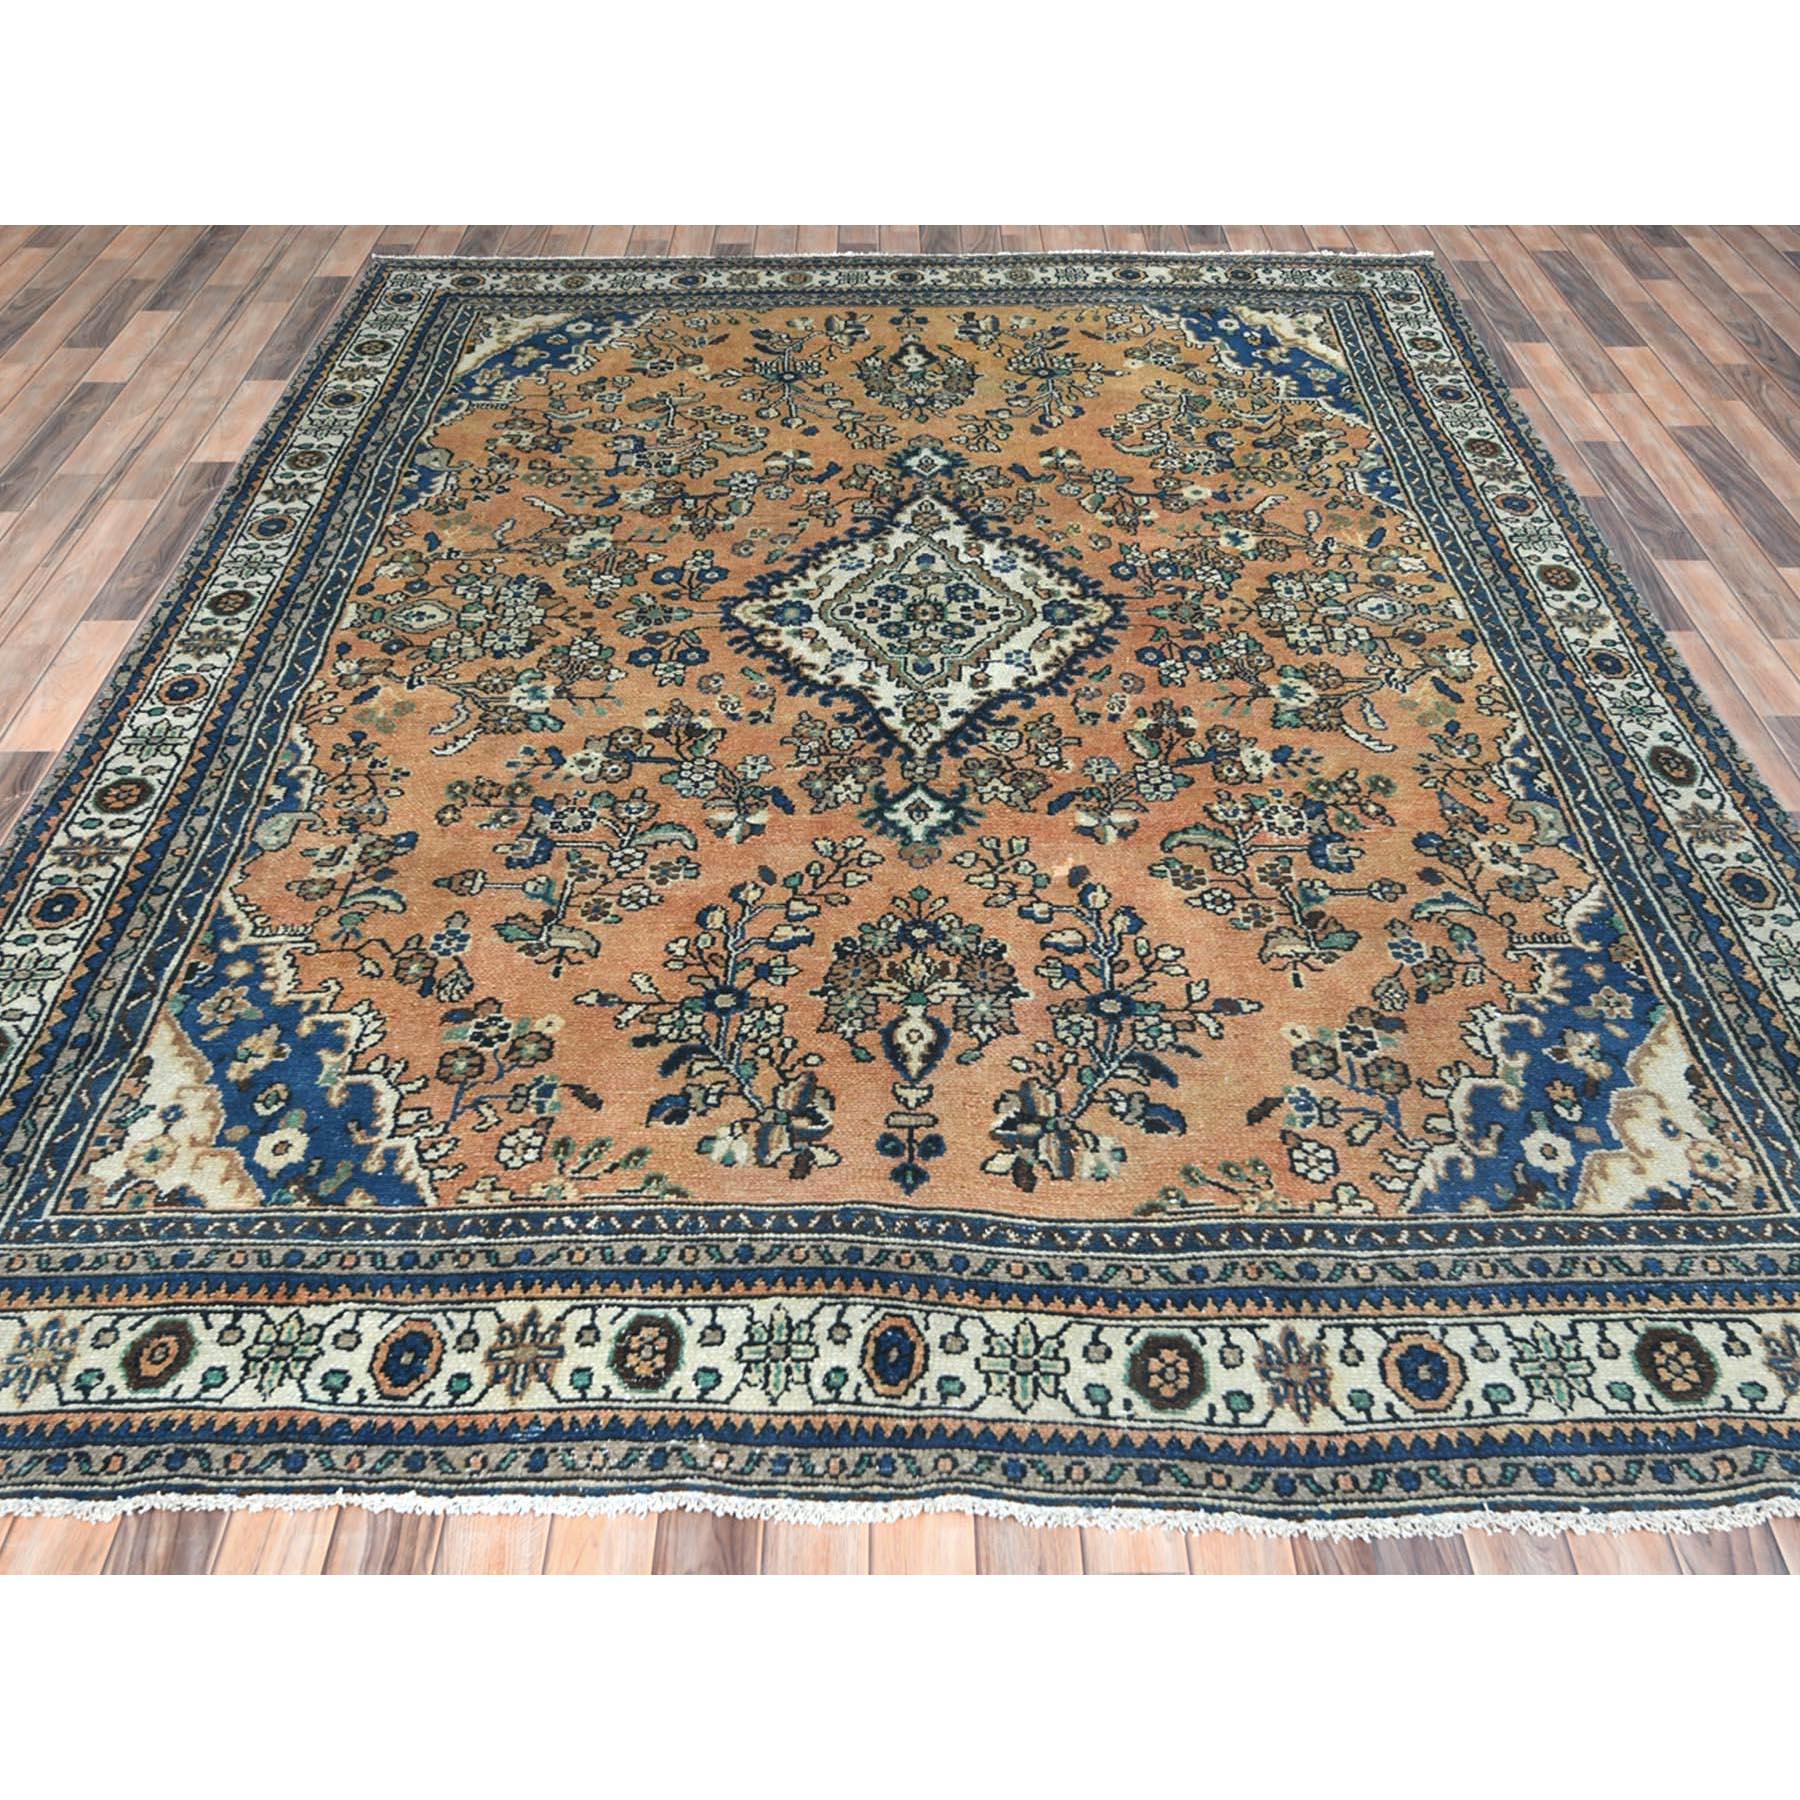 Medieval Apricot Color, Worn Wool Hand Knotted, Vintage Persian Bibikabad, Distressed Rug For Sale